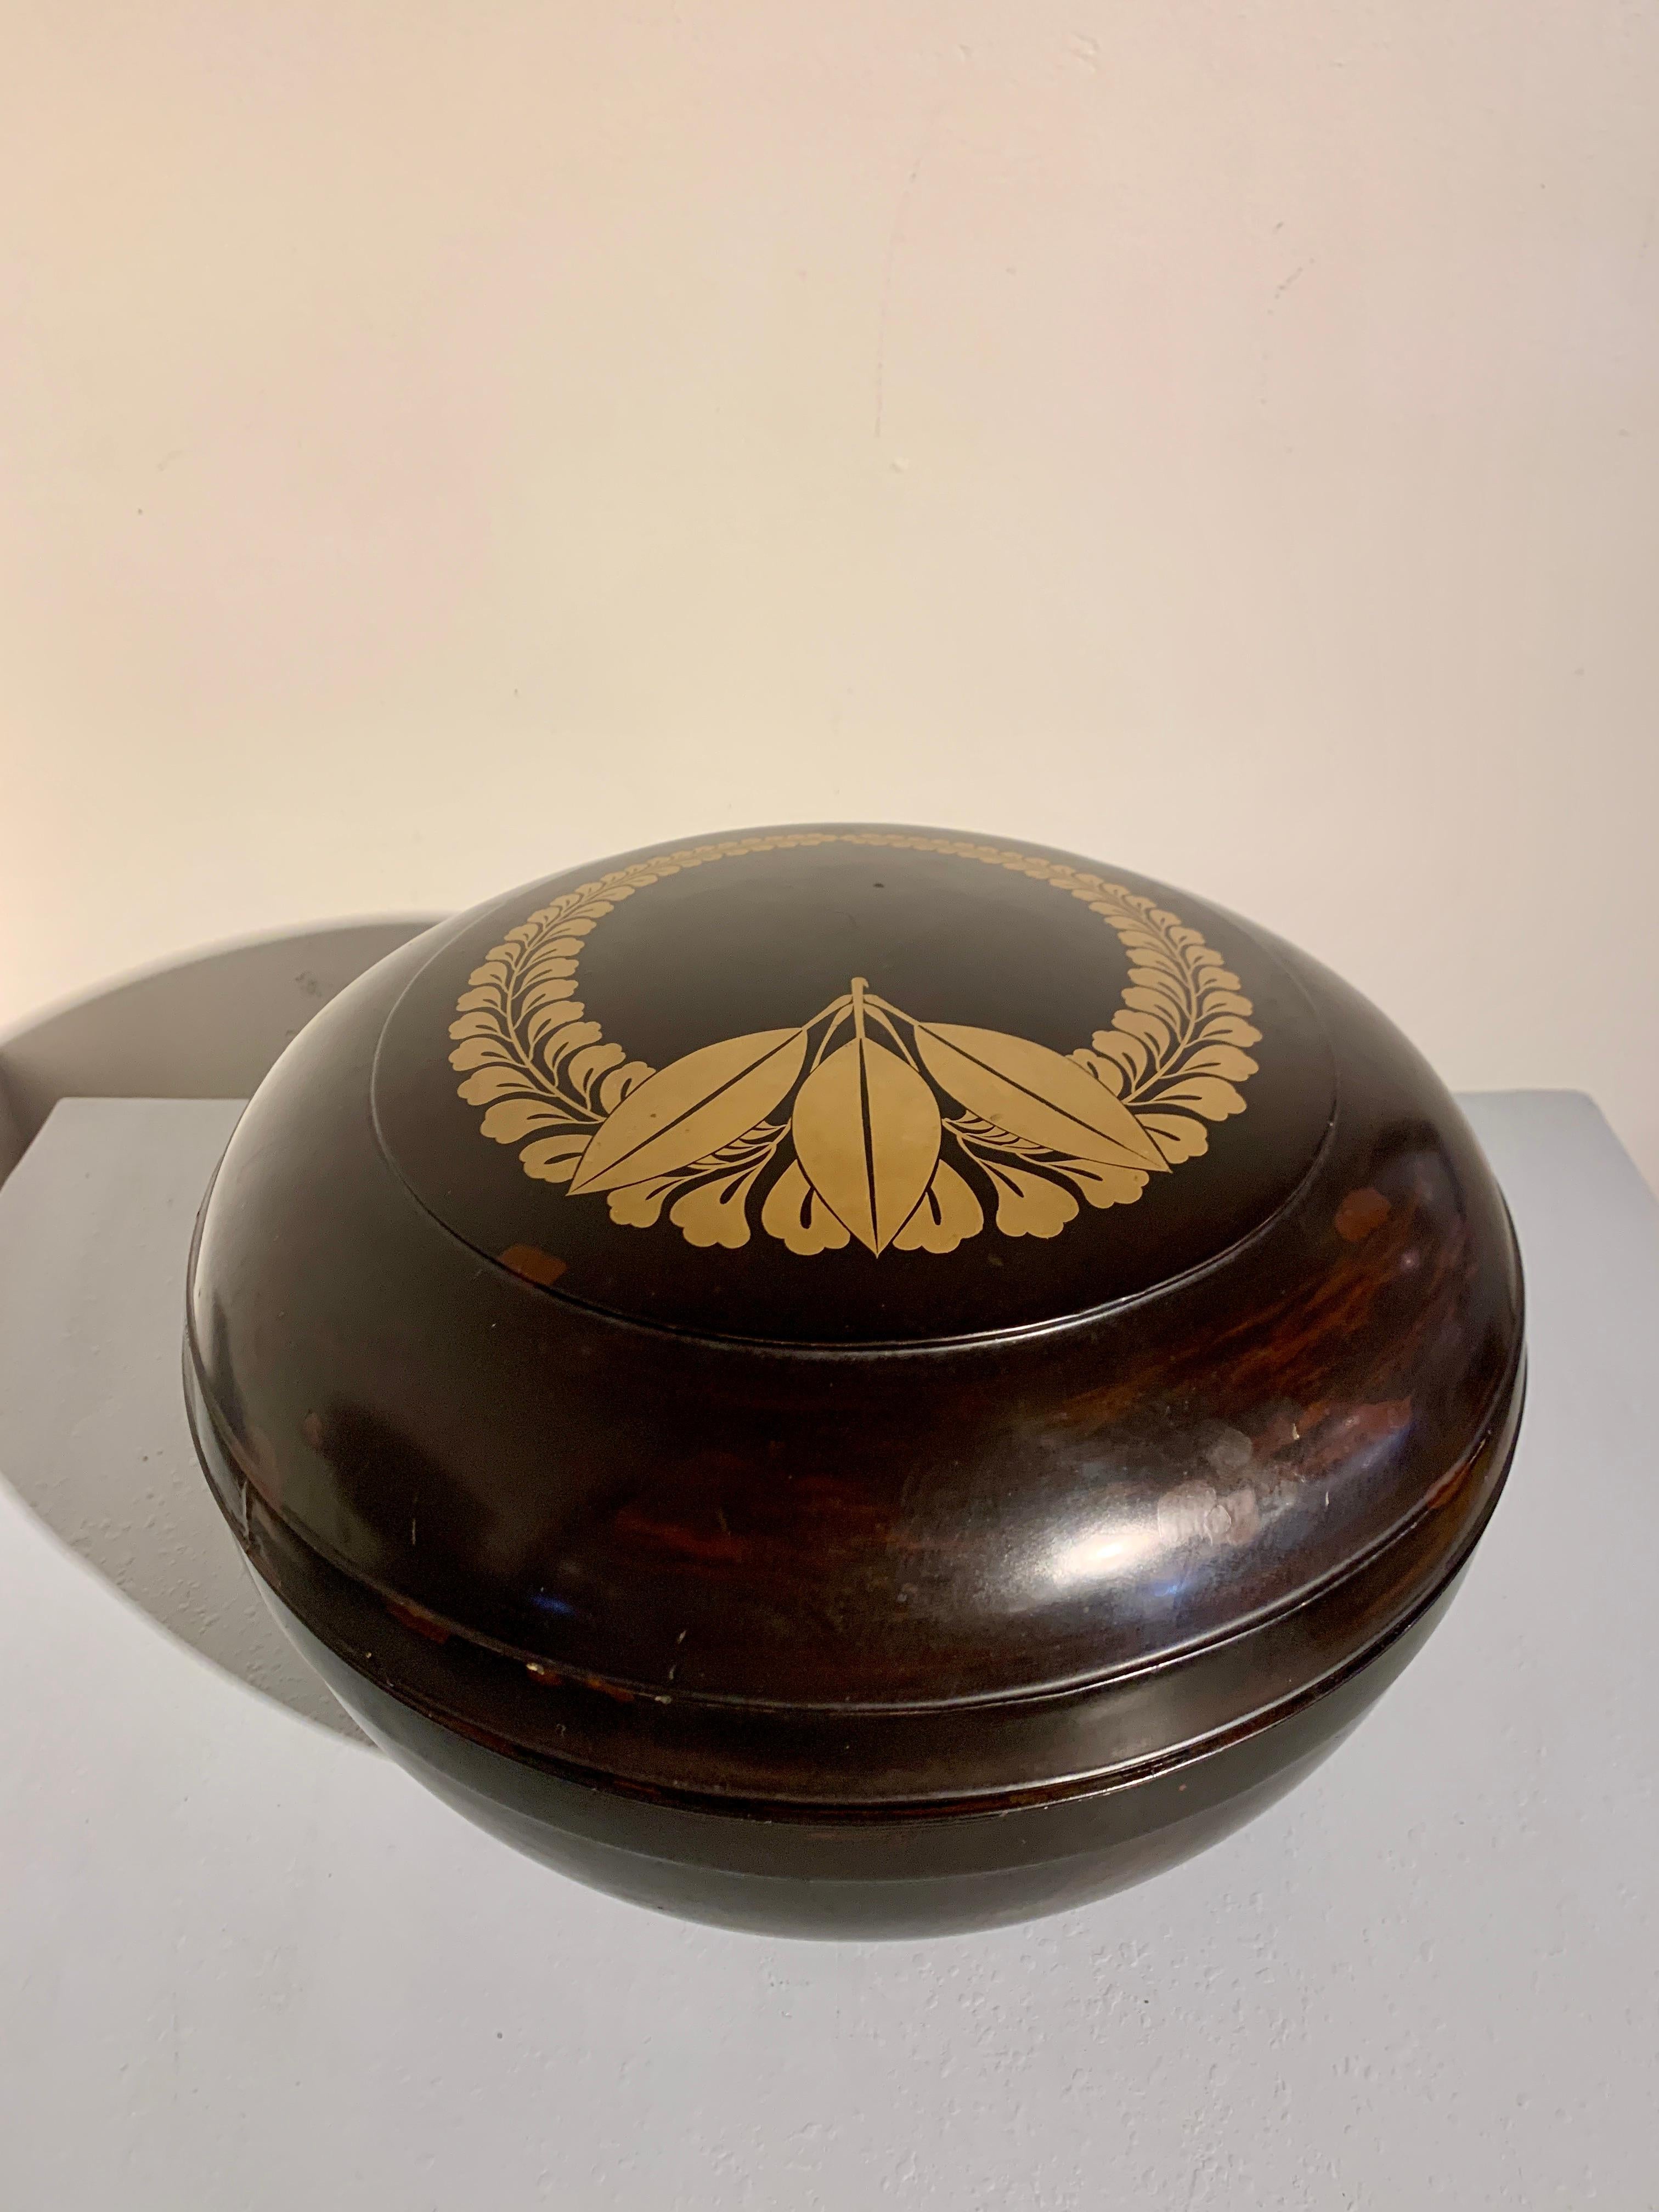 A large Japanese black lacquer and maki-e lacquer decorated footed pedestal bowl and cover featuring the Fujiwara mon, Meiji Period, circa 1900, Japan.

The elegantly proportioned oversized container takes the form of a large and deep bowl supported